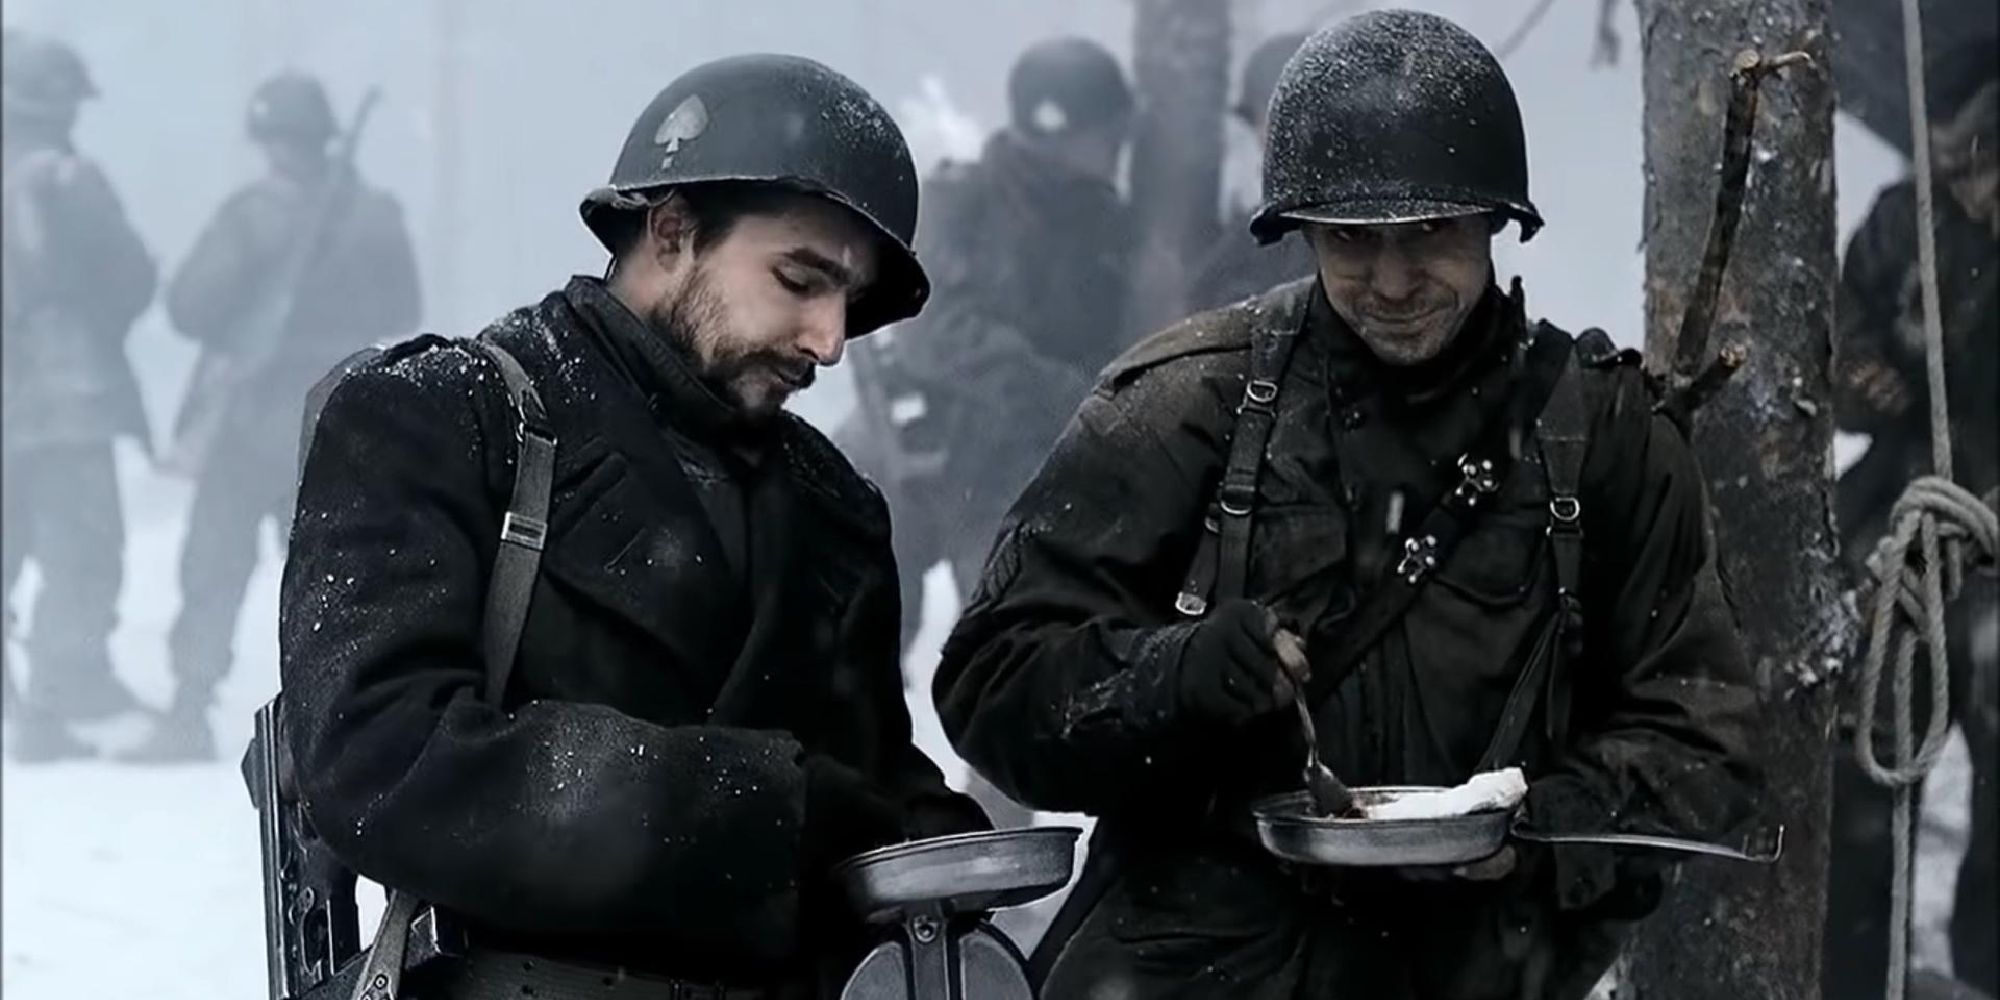 Band of Brothers - 2001 - The Breaking Point